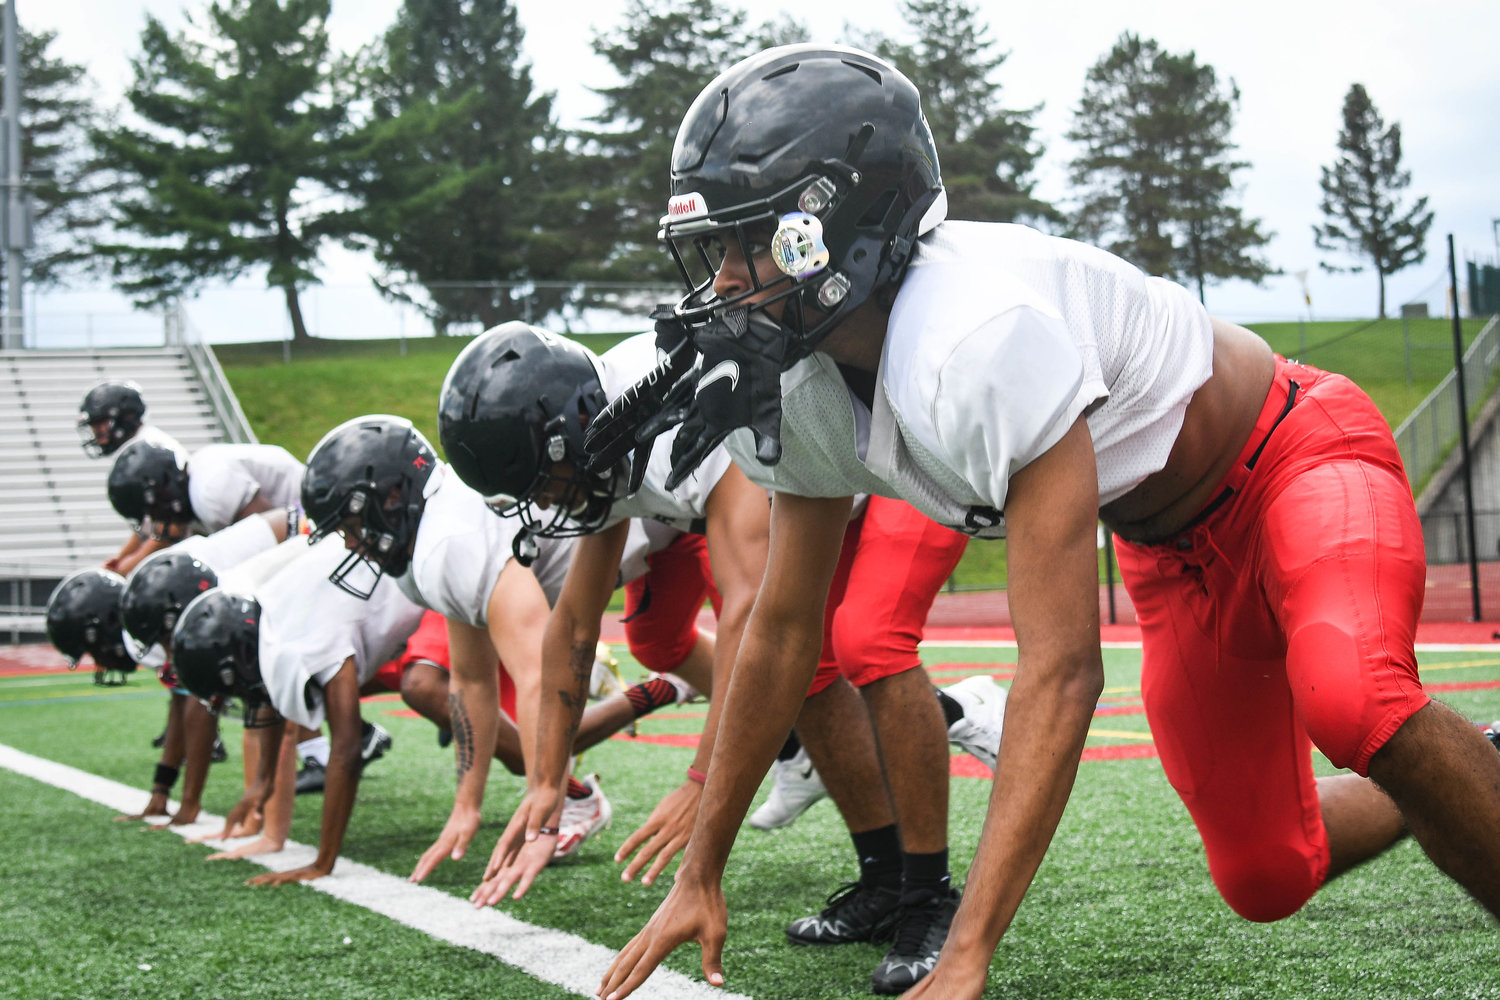 Proctor players grind through up down drills during practice on Tuesday, August 30.